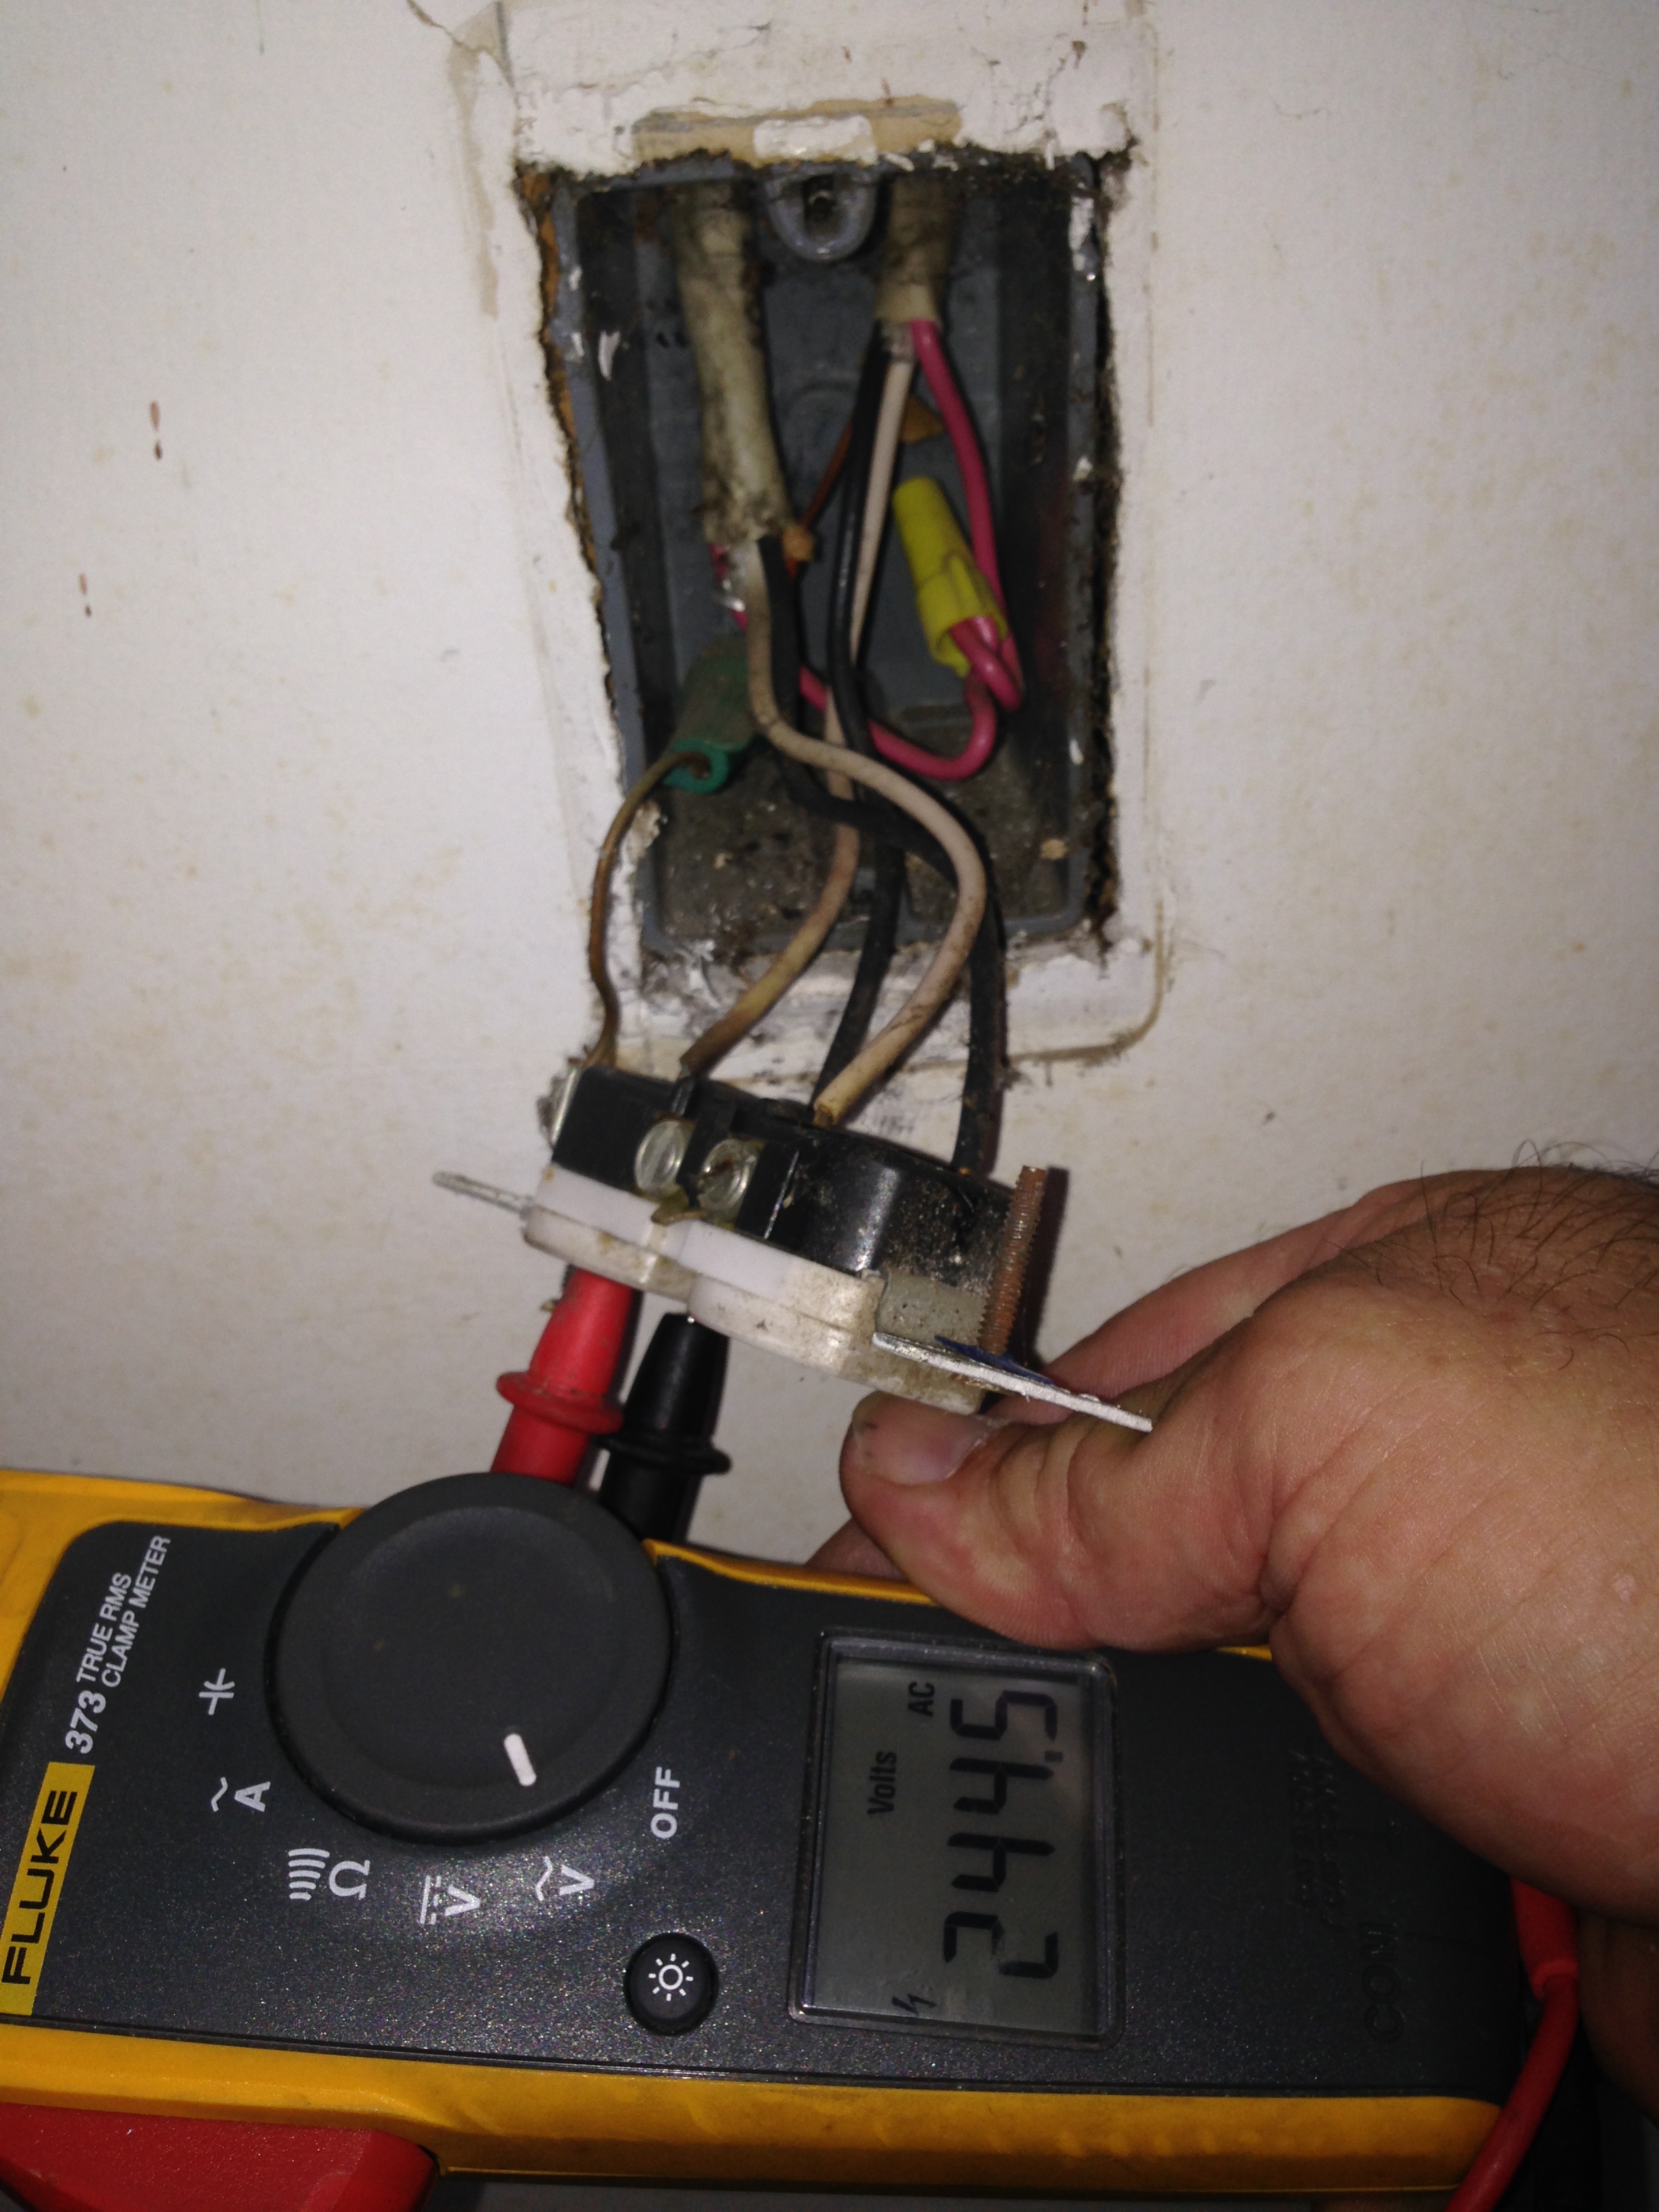 Residential Electrical Outlet Inspected